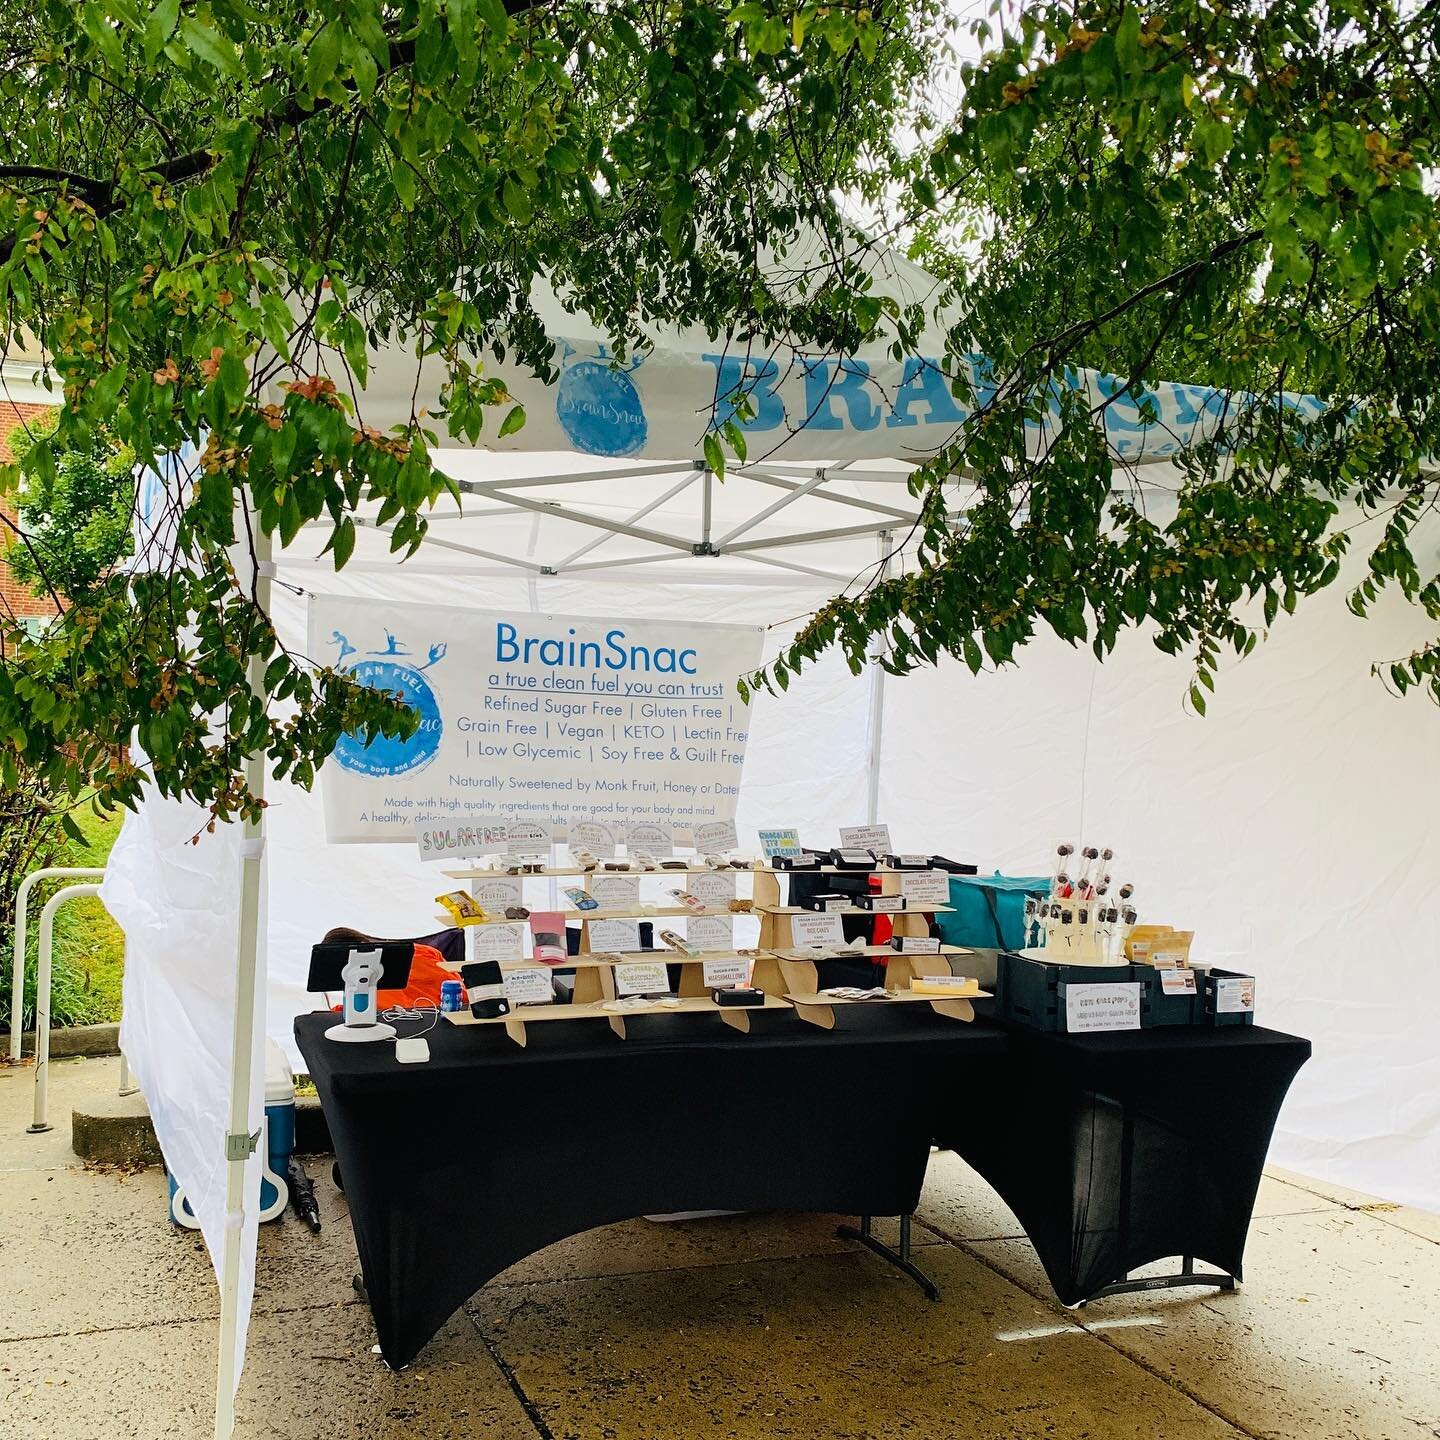 BrainSnac is here, rain or shine! Come to see us for a beautiful rainy day at the Westover farmers market! Pick up some treats and don&rsquo;t forget to get hot cocoa melts to snuggle up with in this weather!
You can also order on our website for fre